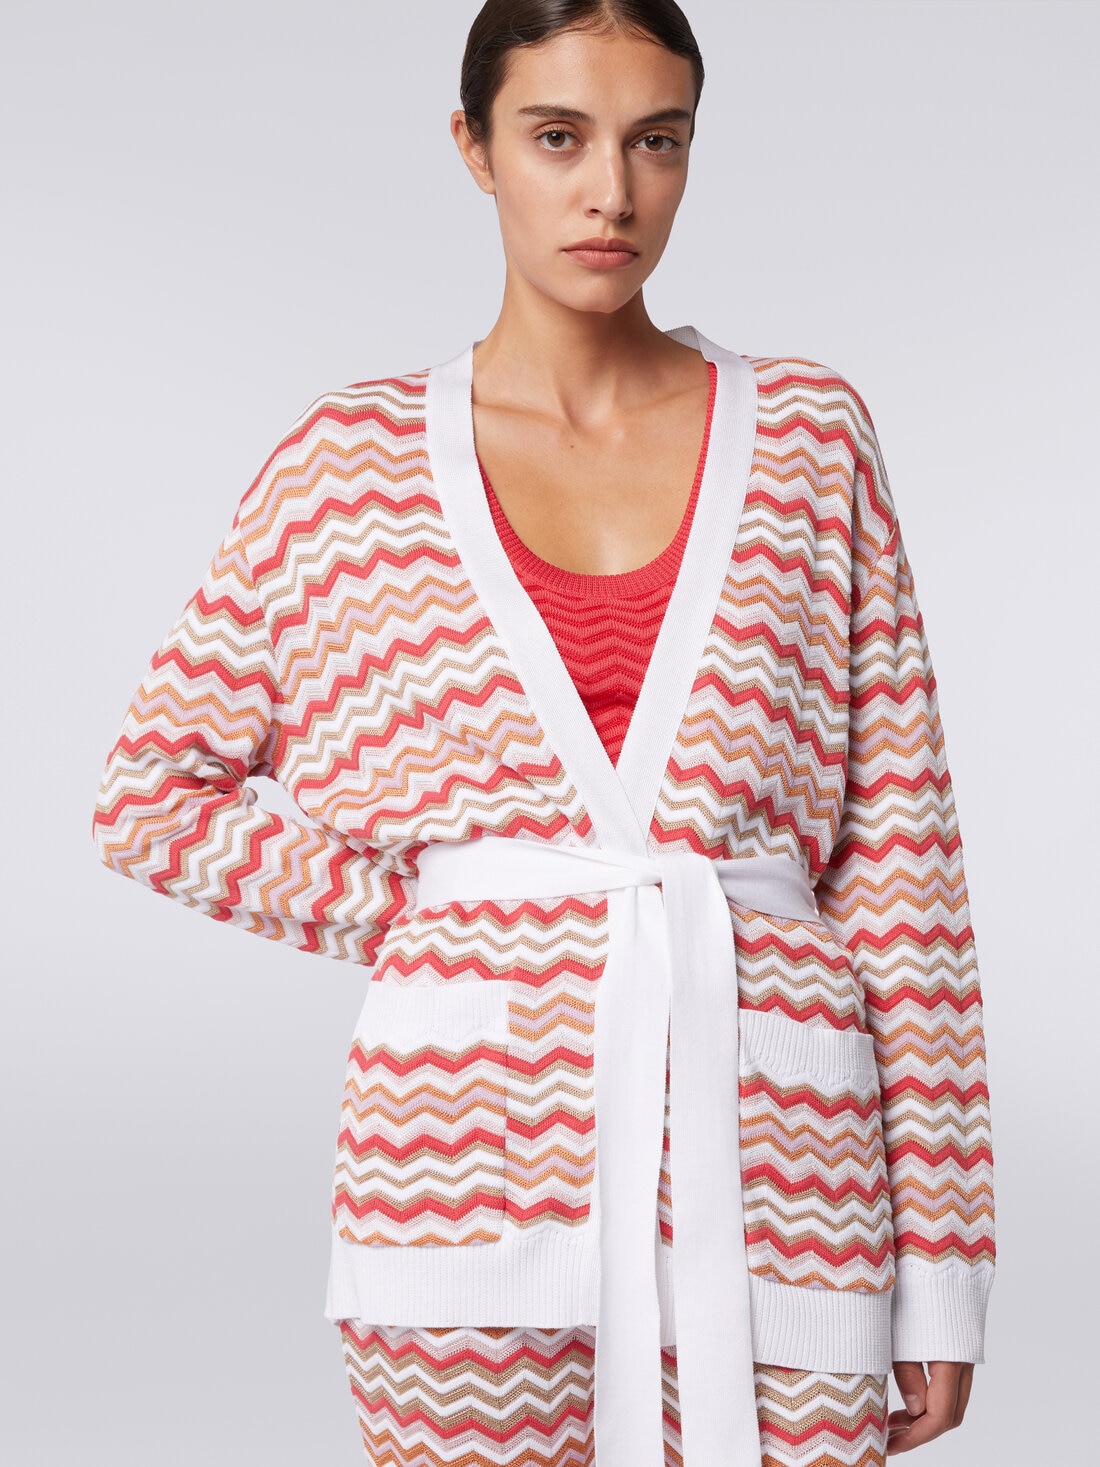 Cardigan in zigzag viscose and cotton knit , Multicoloured  - DS24SM0PBK034FSM9AN - 4